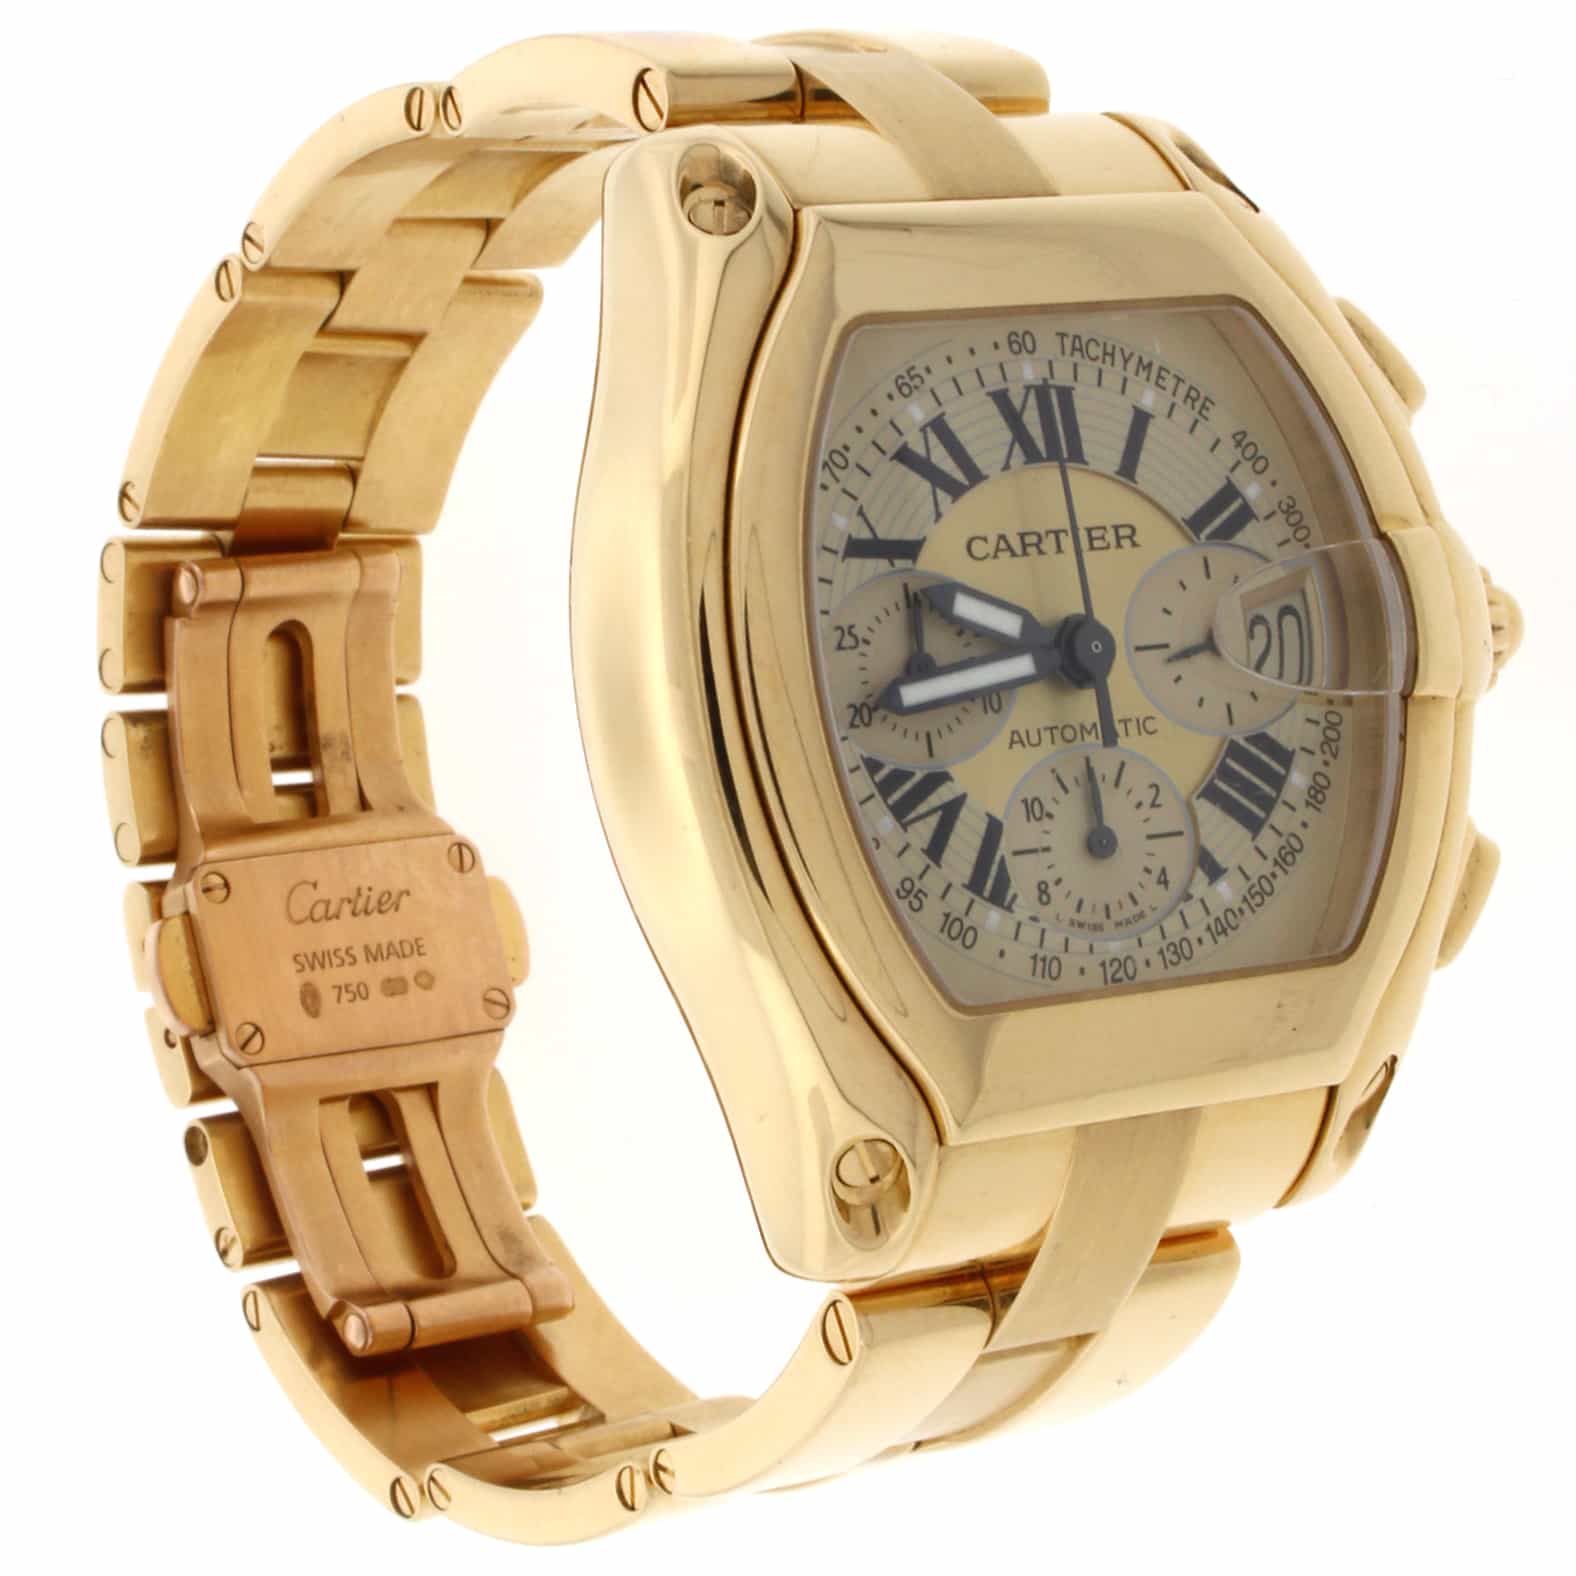 Cartier Roadster XL Chronograph 18K Yellow Gold Automatic Mens Watch 2